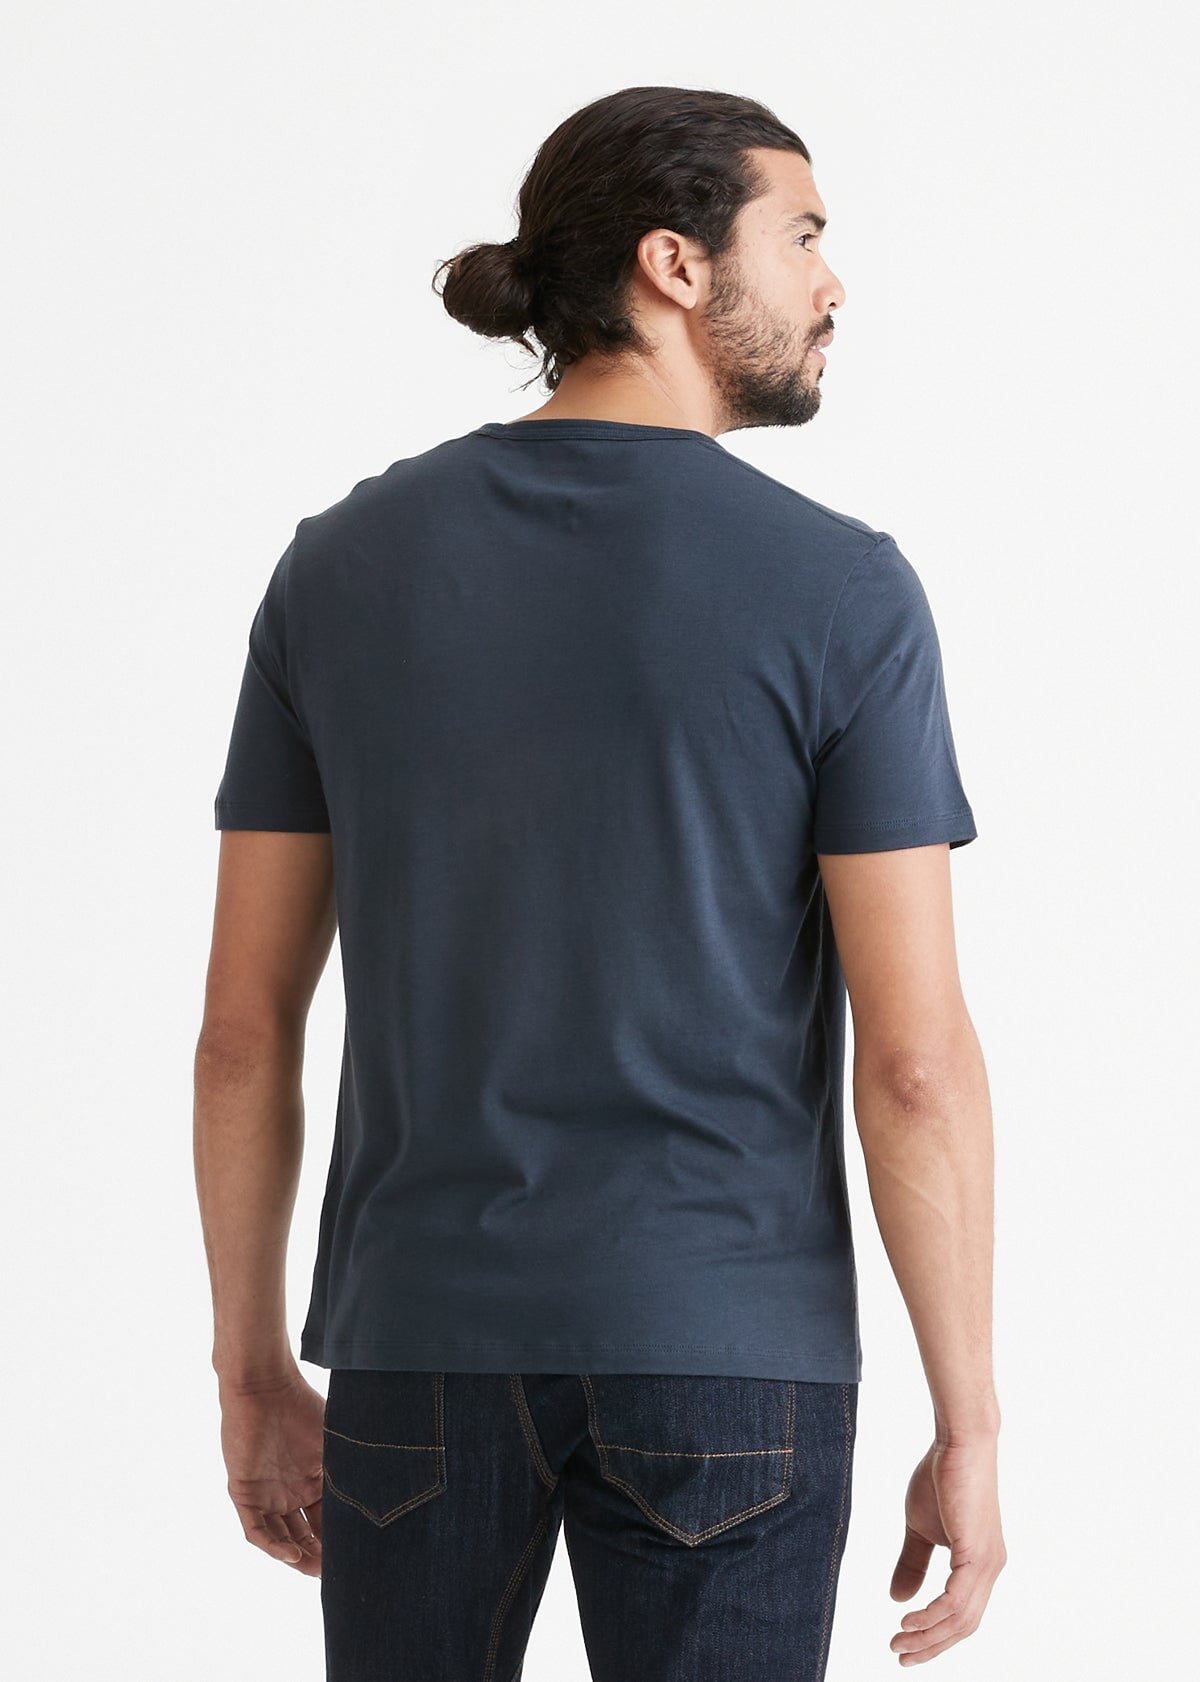 Buy Navy Tshirts for Men by TRENDS TOWER Online